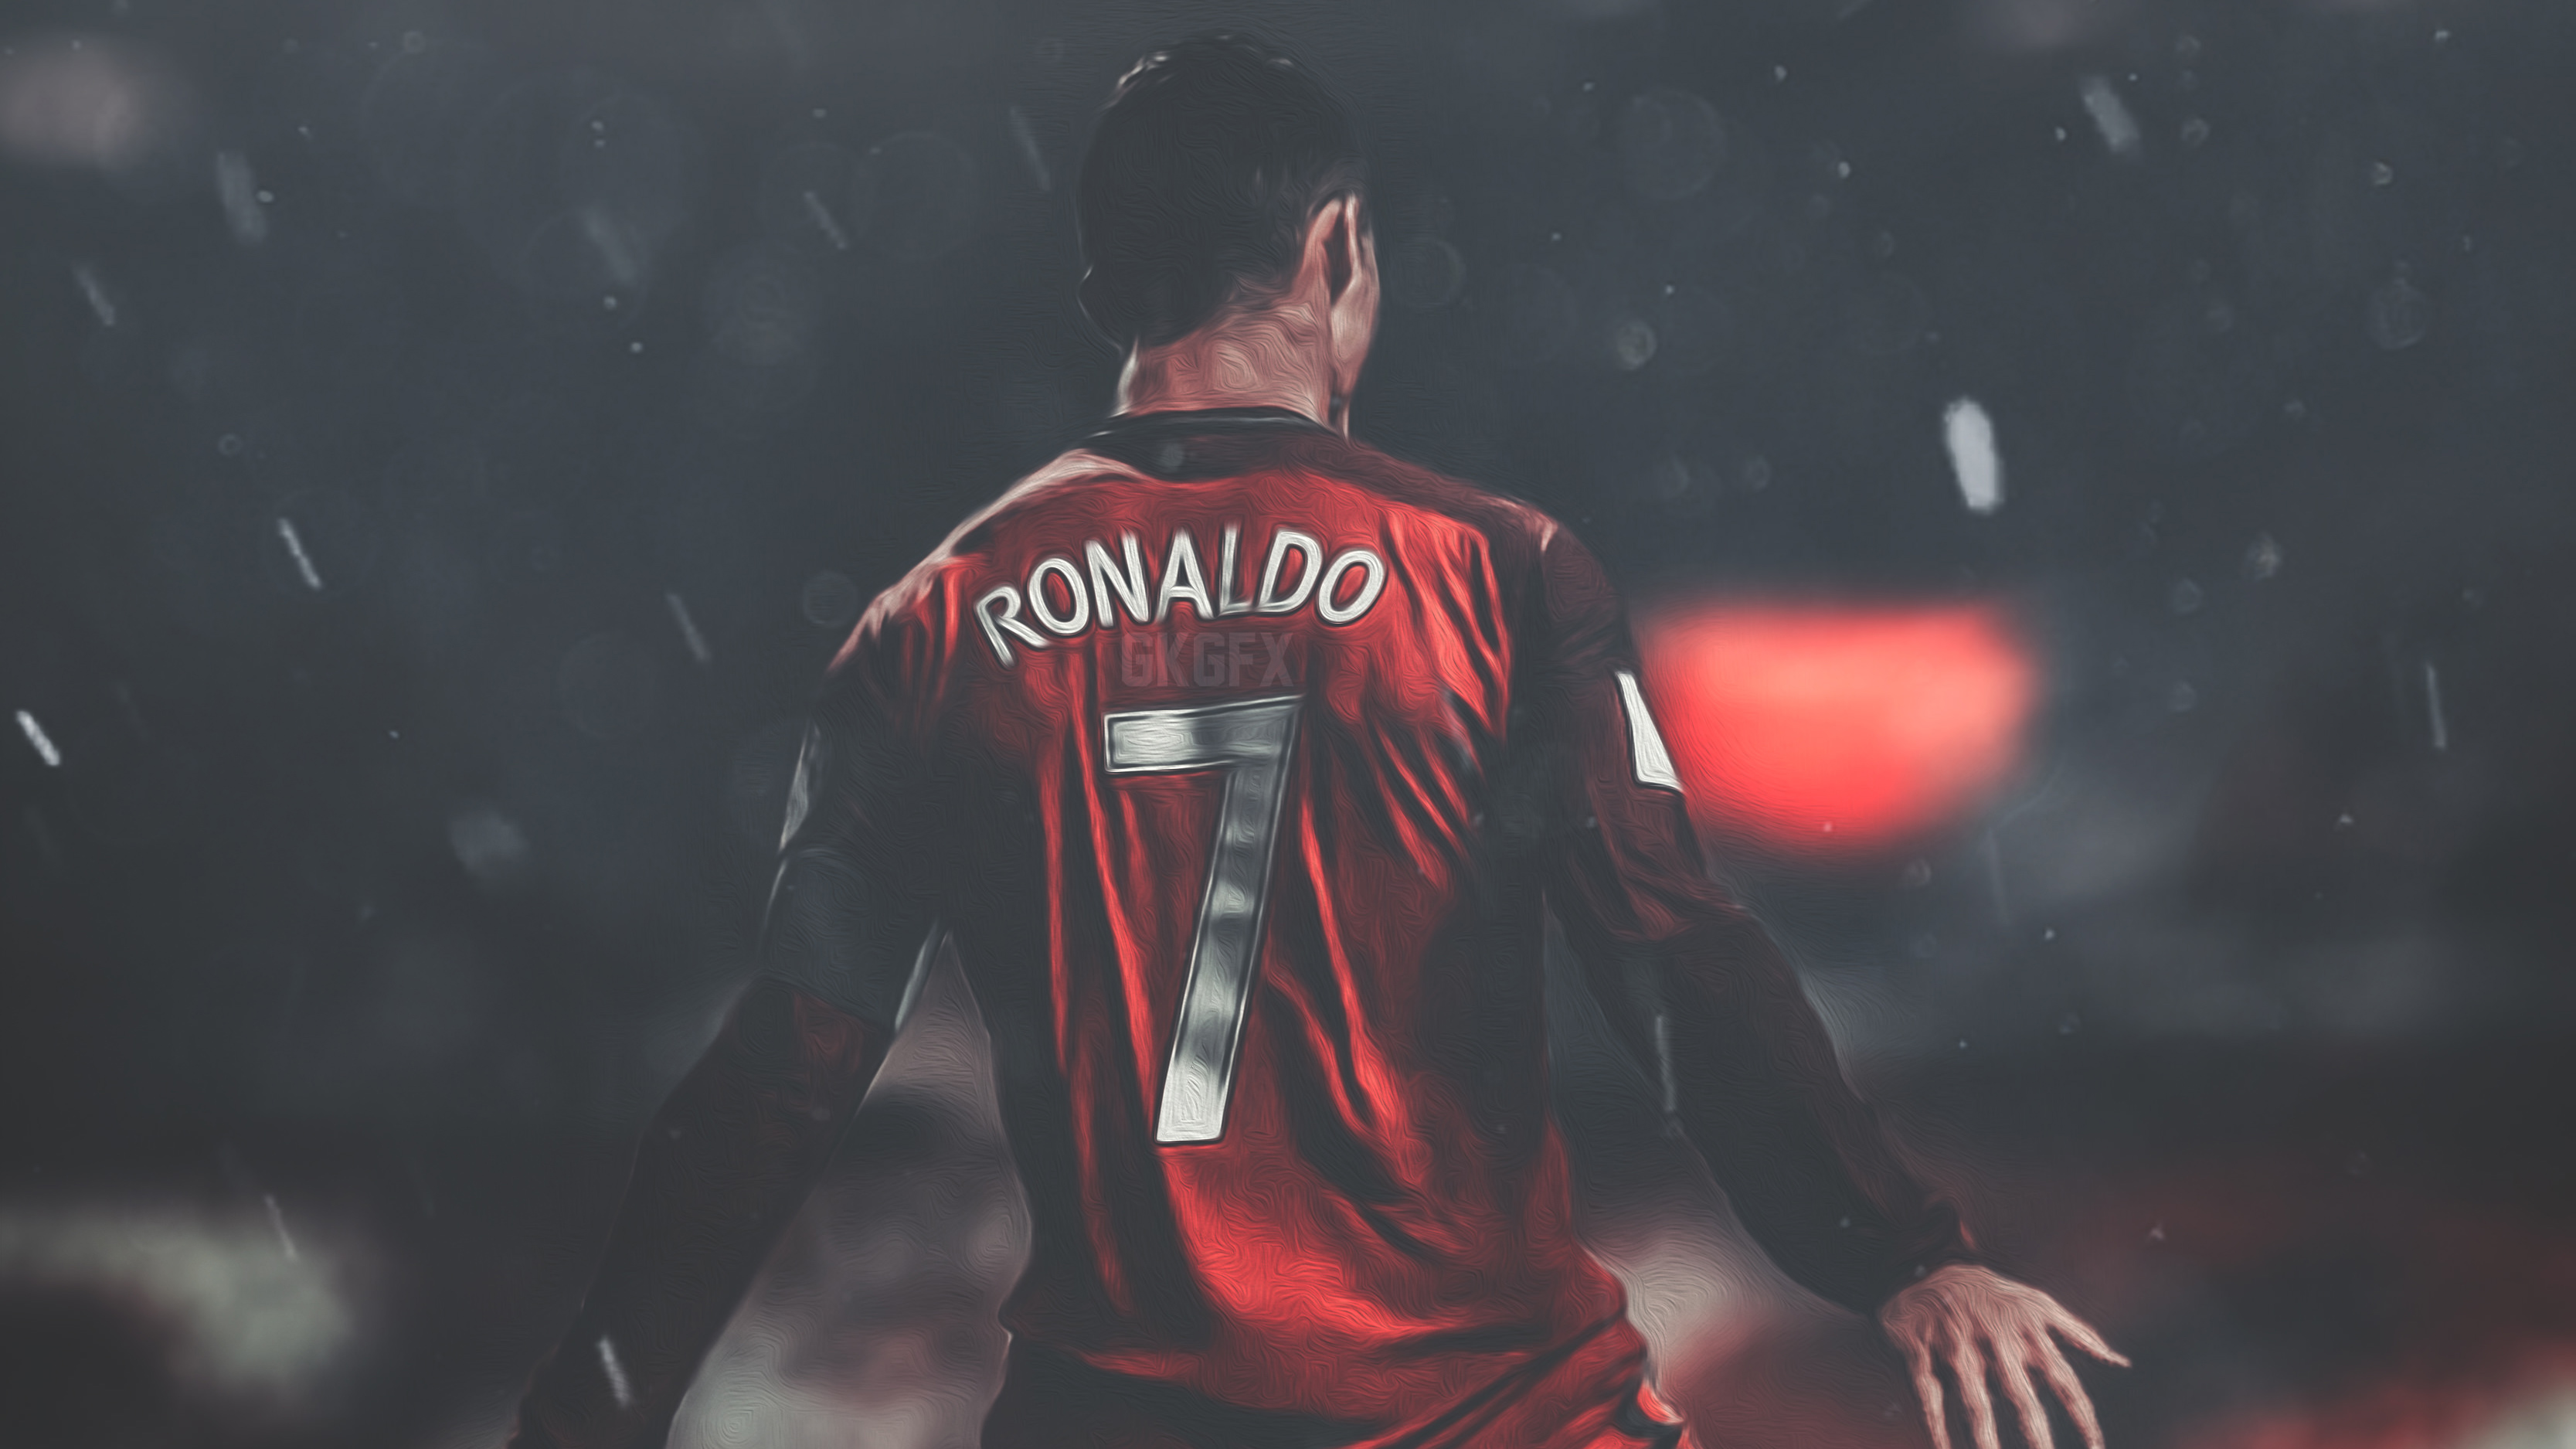 CR HD Sports, 4k Wallpaper, Image, Background, Photo and Picture